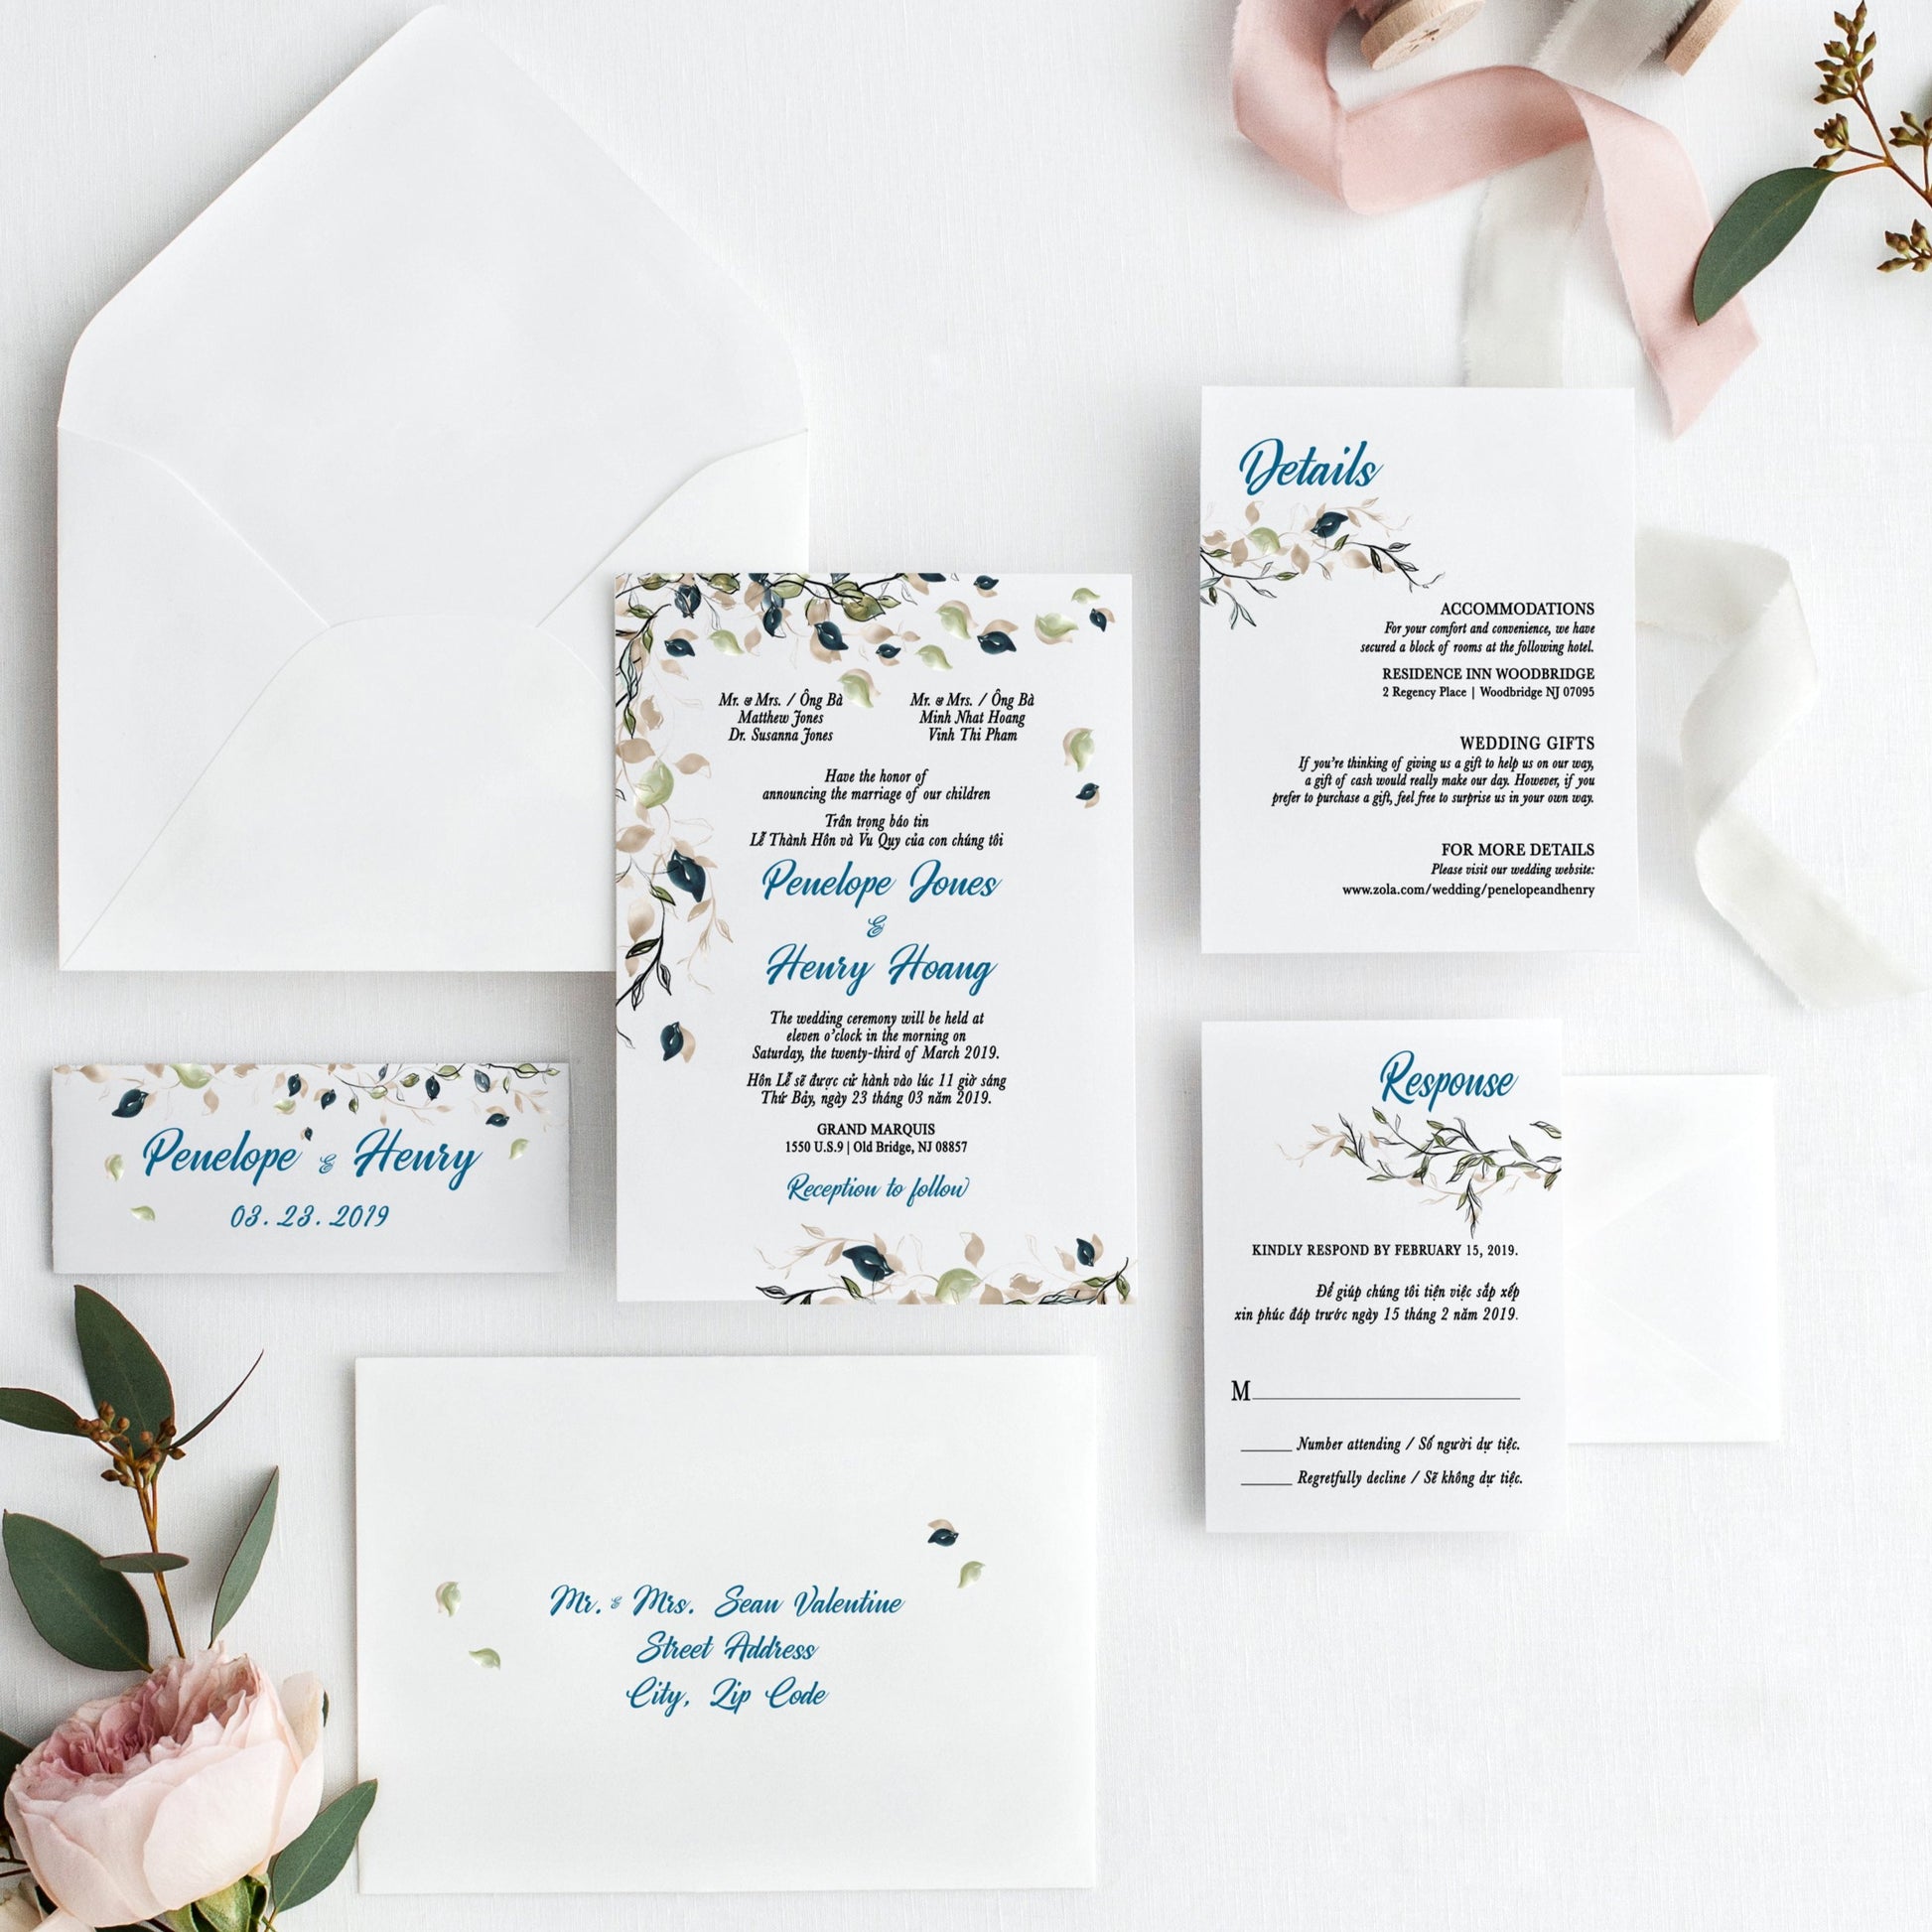 Stationery Stores, Wedding Invitations, Gifts & More